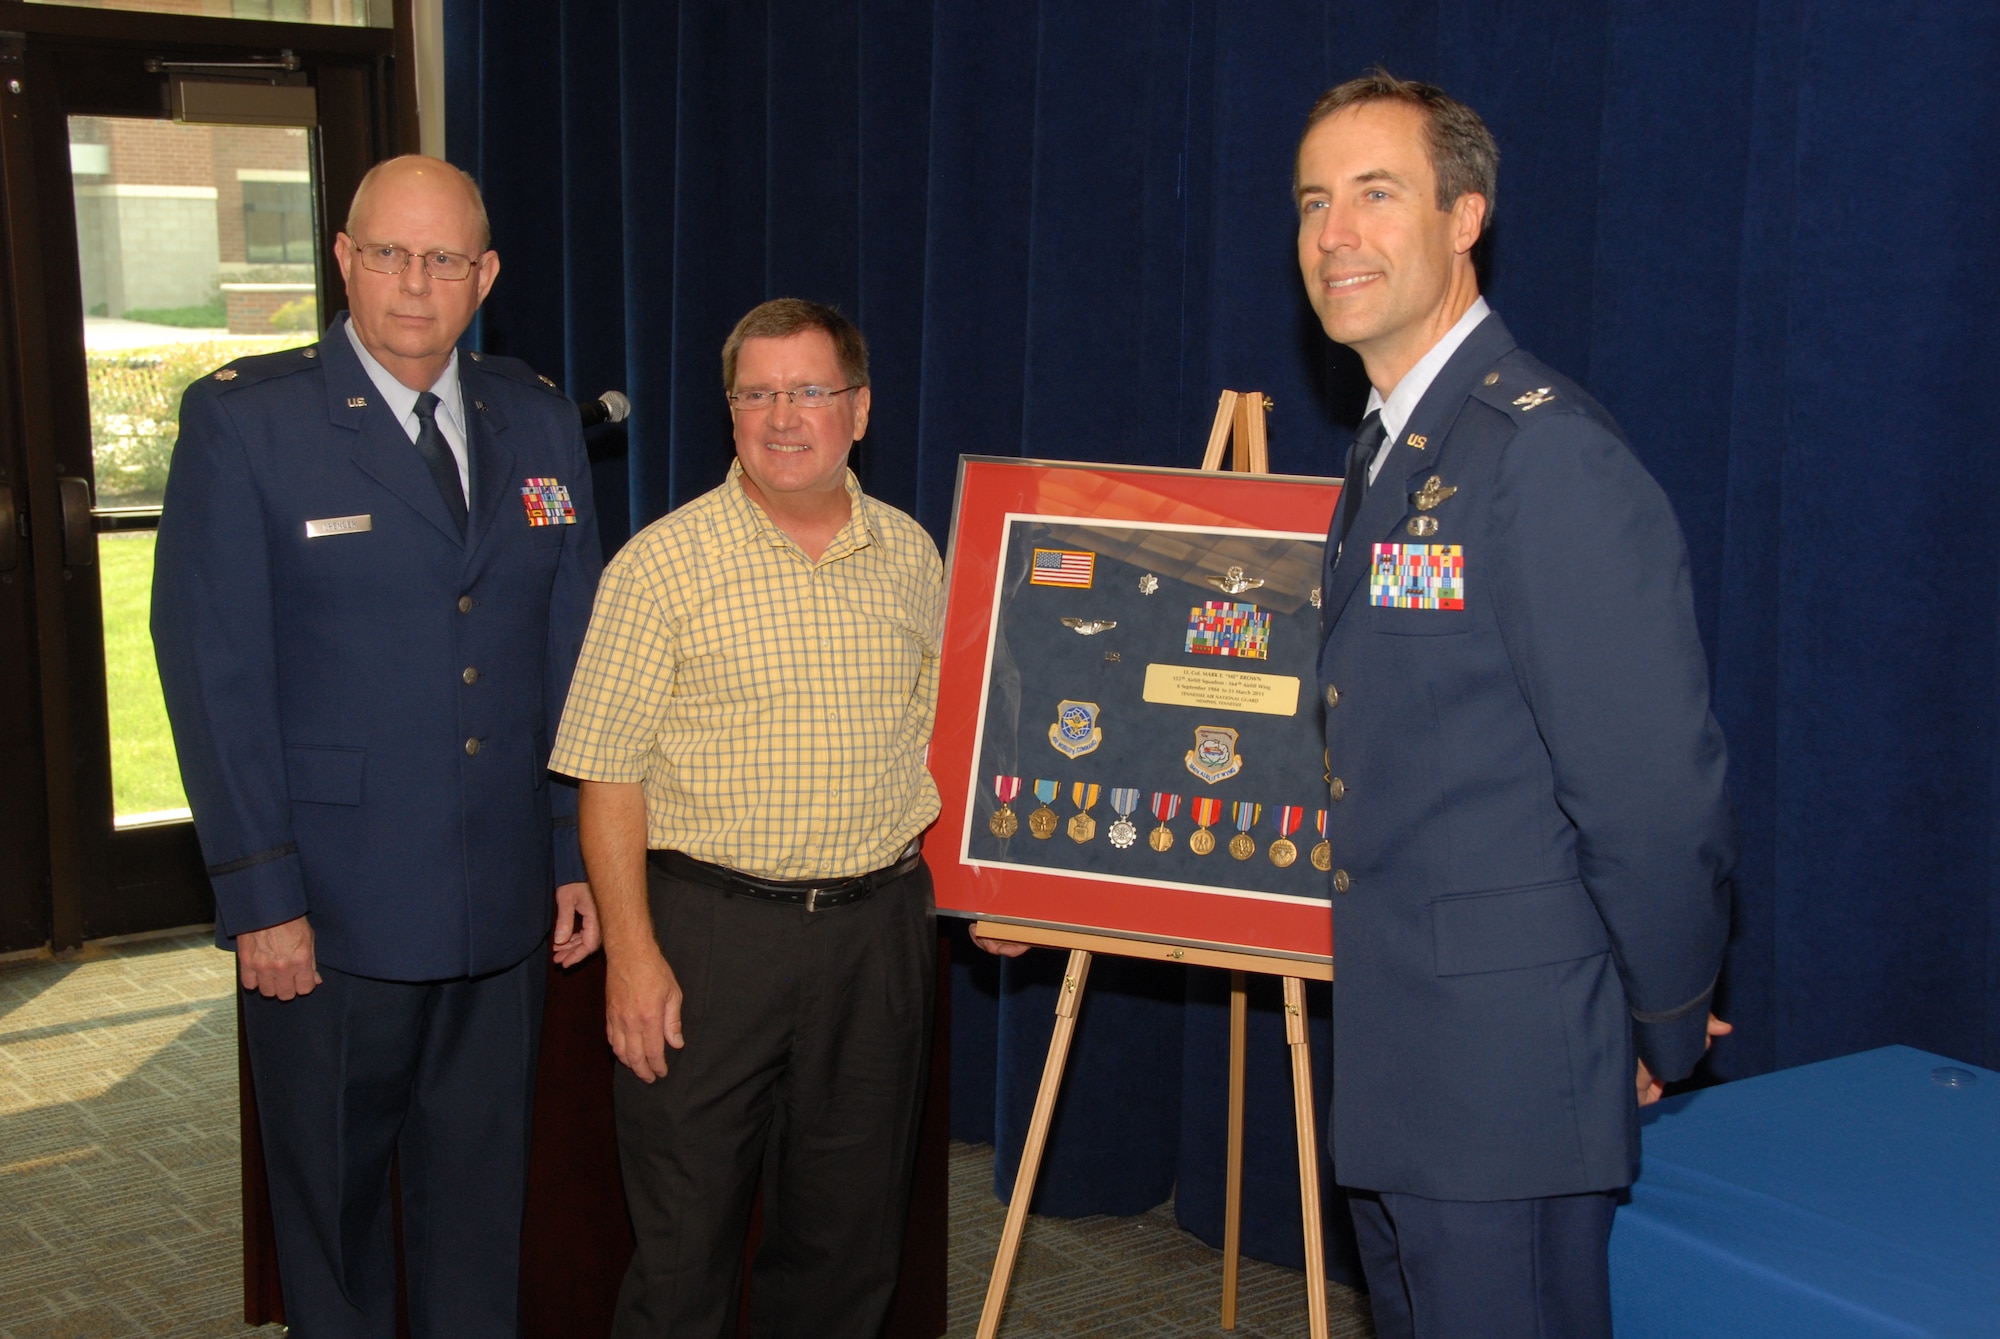 Mark E. Brown, retired Lieutenant Colonel, poses with, Lieutenant Colonel Olen L. Spencer, Executive Support Officer for the 164th Airlift Wing and Colonel Mark J. Devine, 164th Airlift Wing Vice Commander during the retirement ceremony held for Mr. Brown on the 4th of June, 2011.